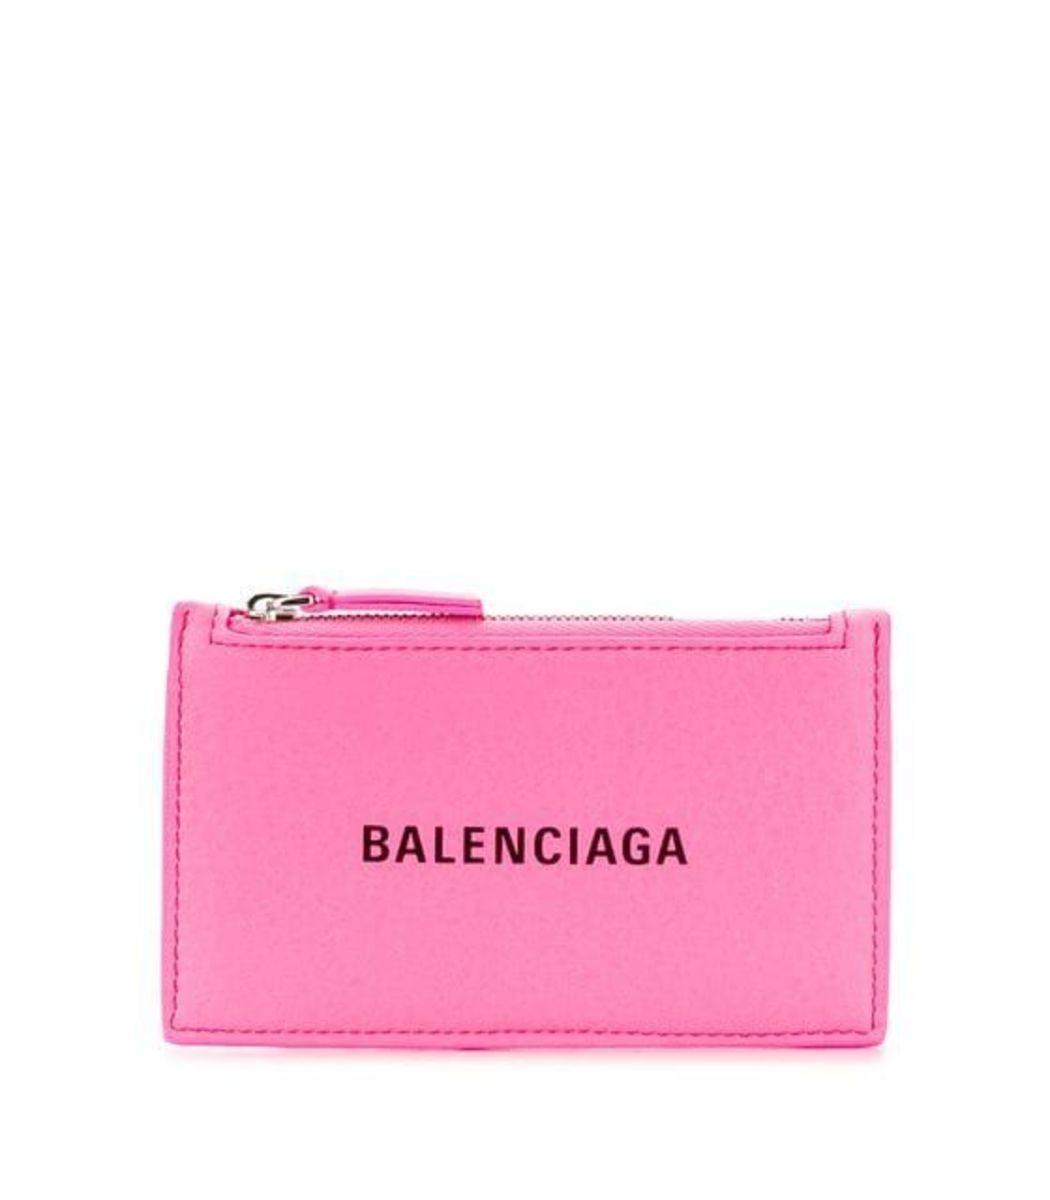 Balenciaga Leather Everyday Card Holder in Pink | Lyst